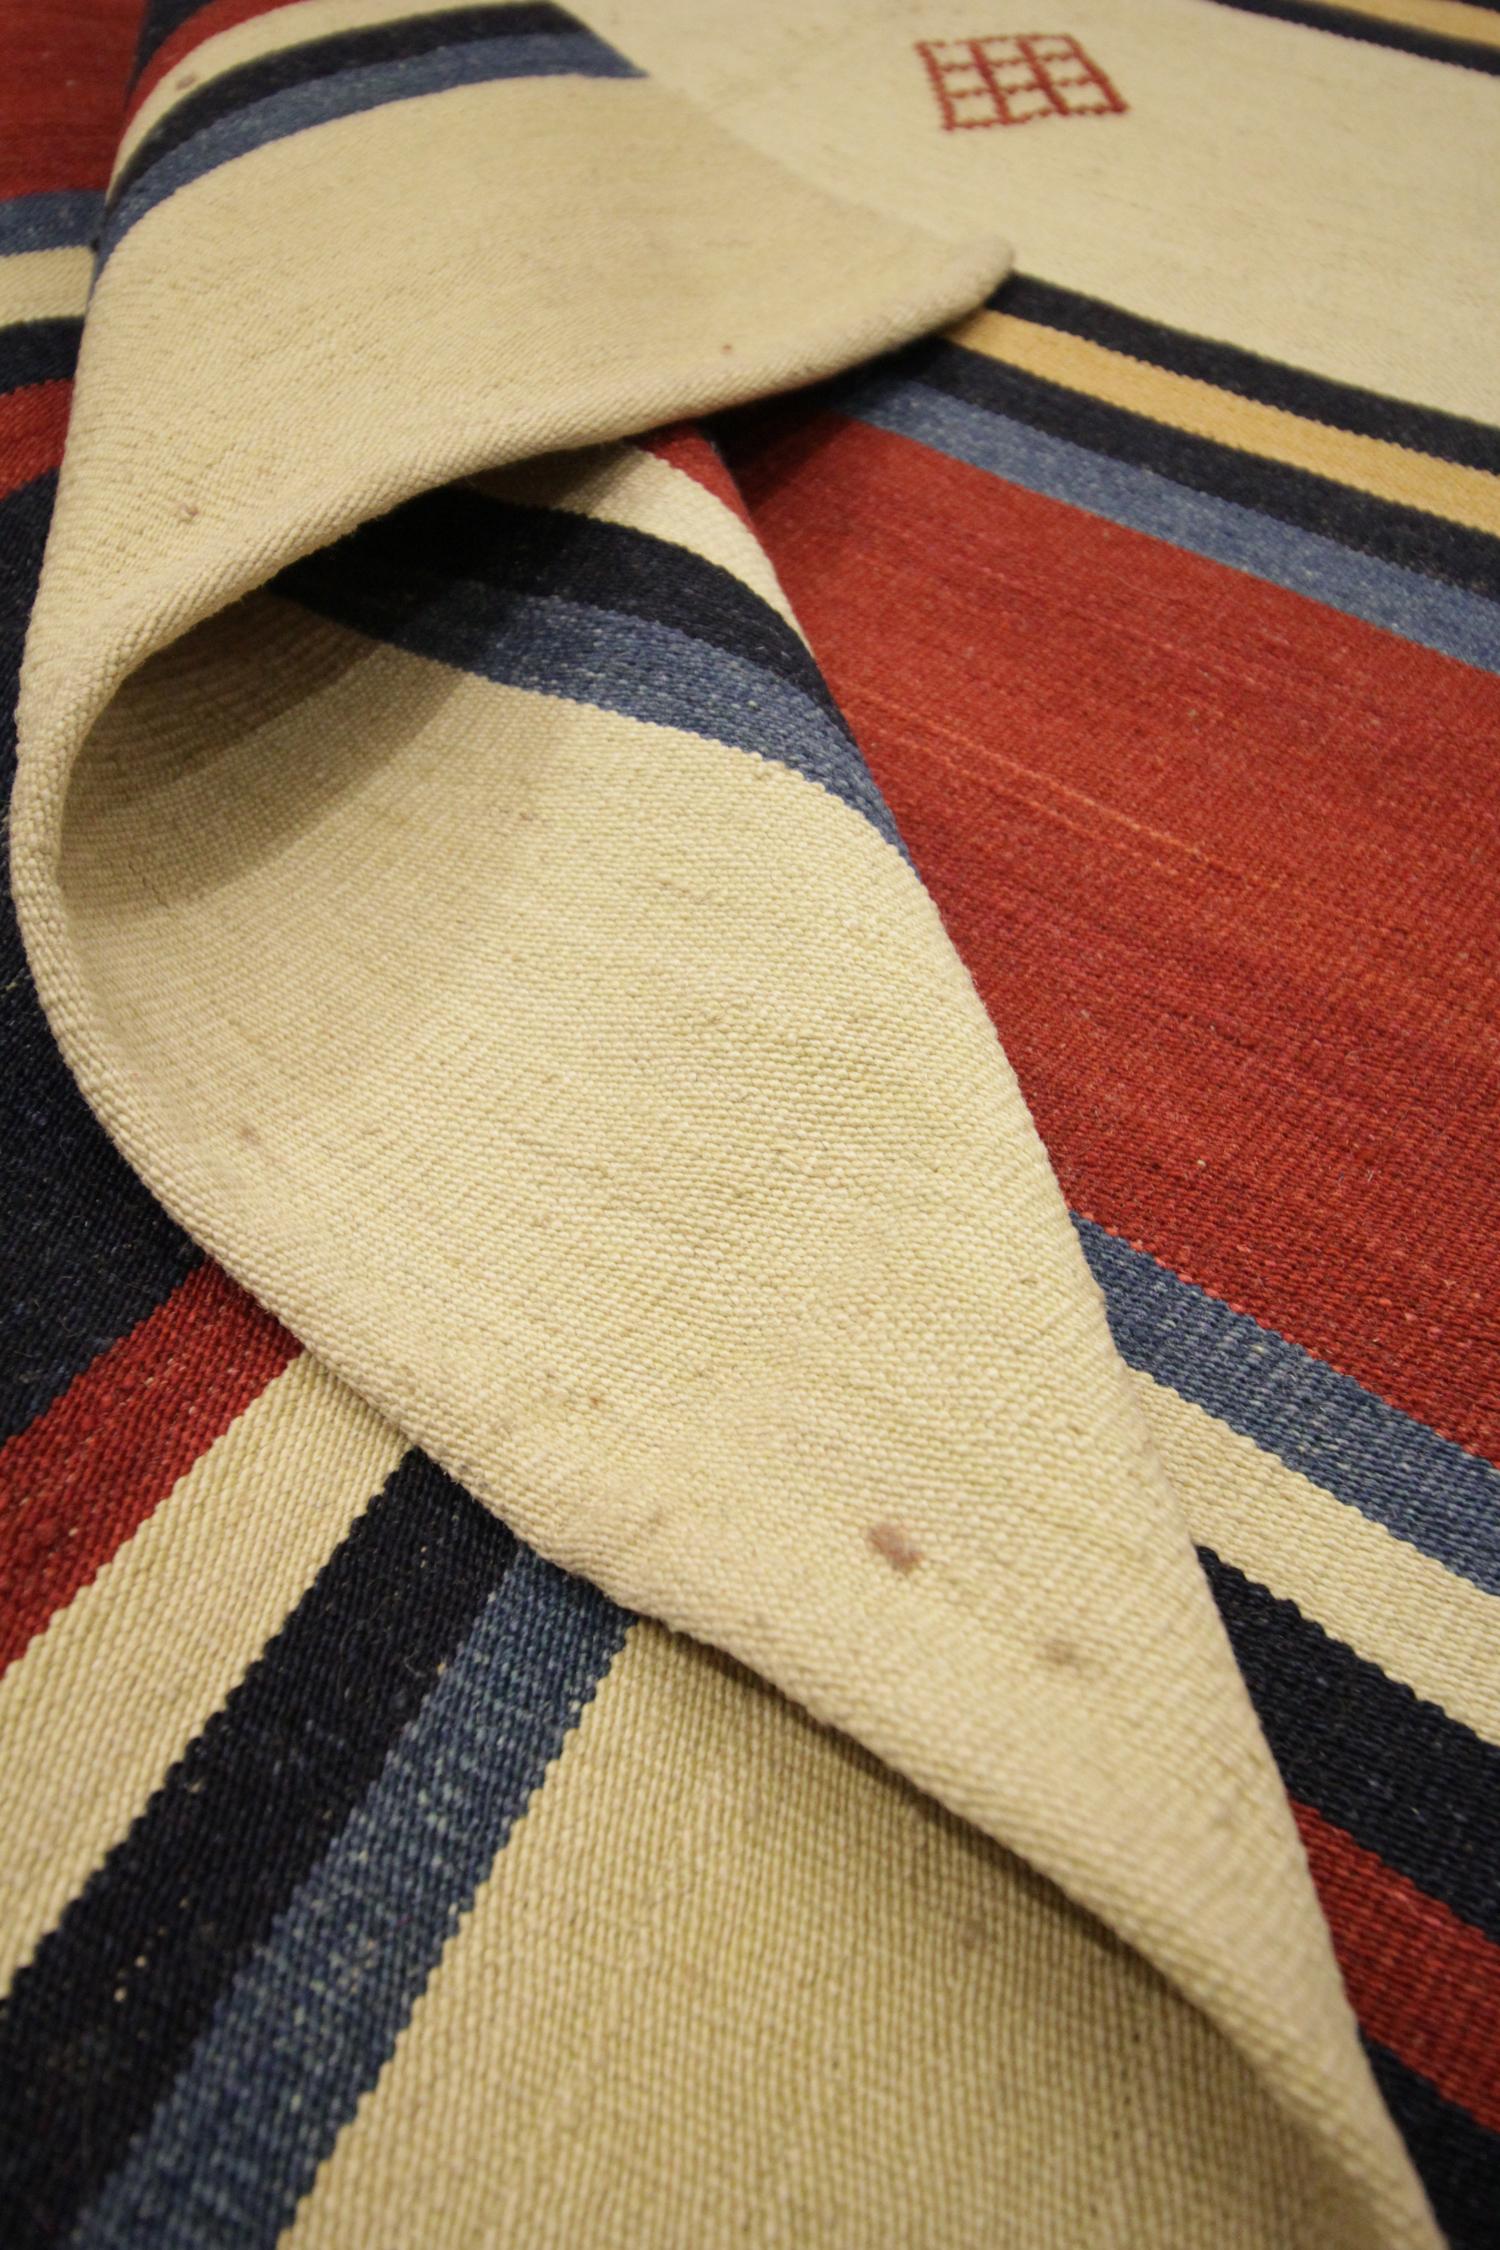 Modern Striped Kilims Rug Blue Red Kilim Rugs Wool Flat-Weave Carpet In Excellent Condition For Sale In Hampshire, GB